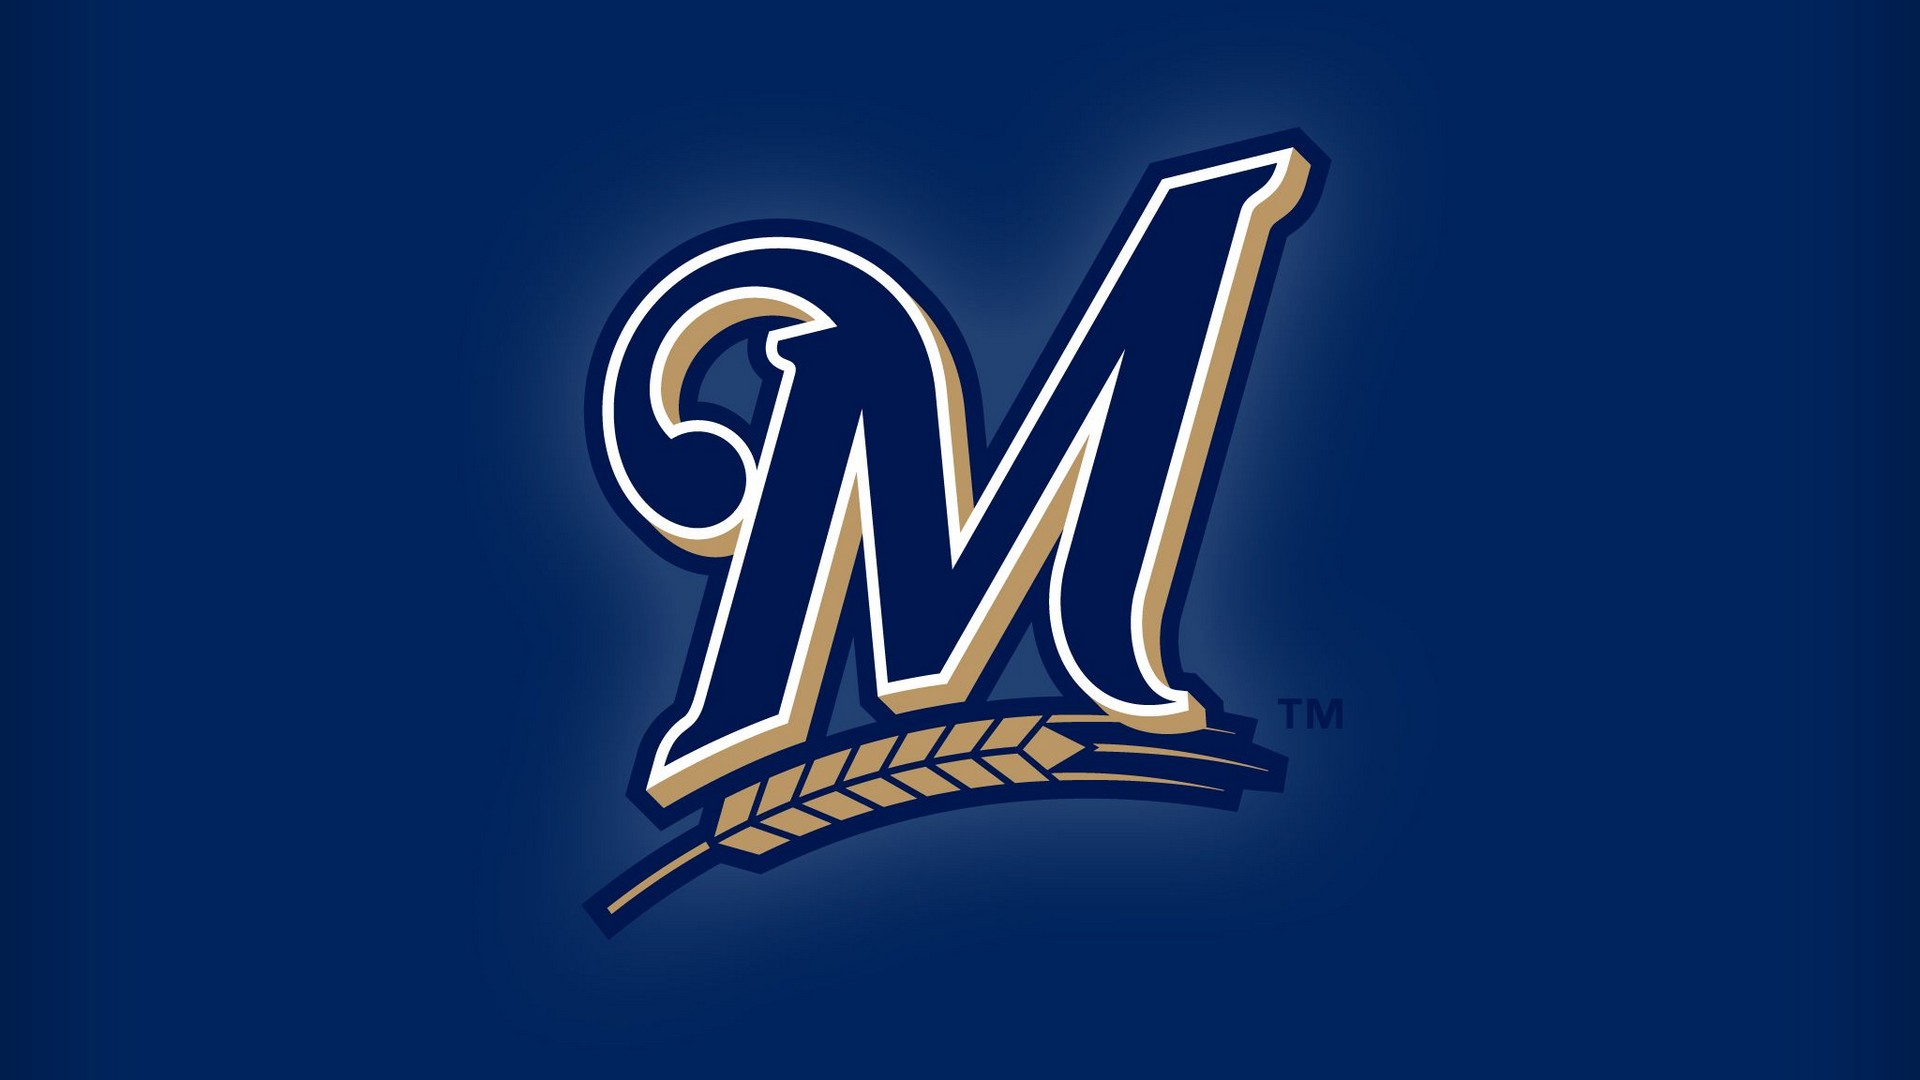 Wallpapers HD Milwaukee Brewers with high-resolution 1920x1080 pixel. You can use this wallpaper for Mac Desktop Wallpaper, Laptop Screensavers, Android Wallpapers, Tablet or iPhone Home Screen and another mobile phone device